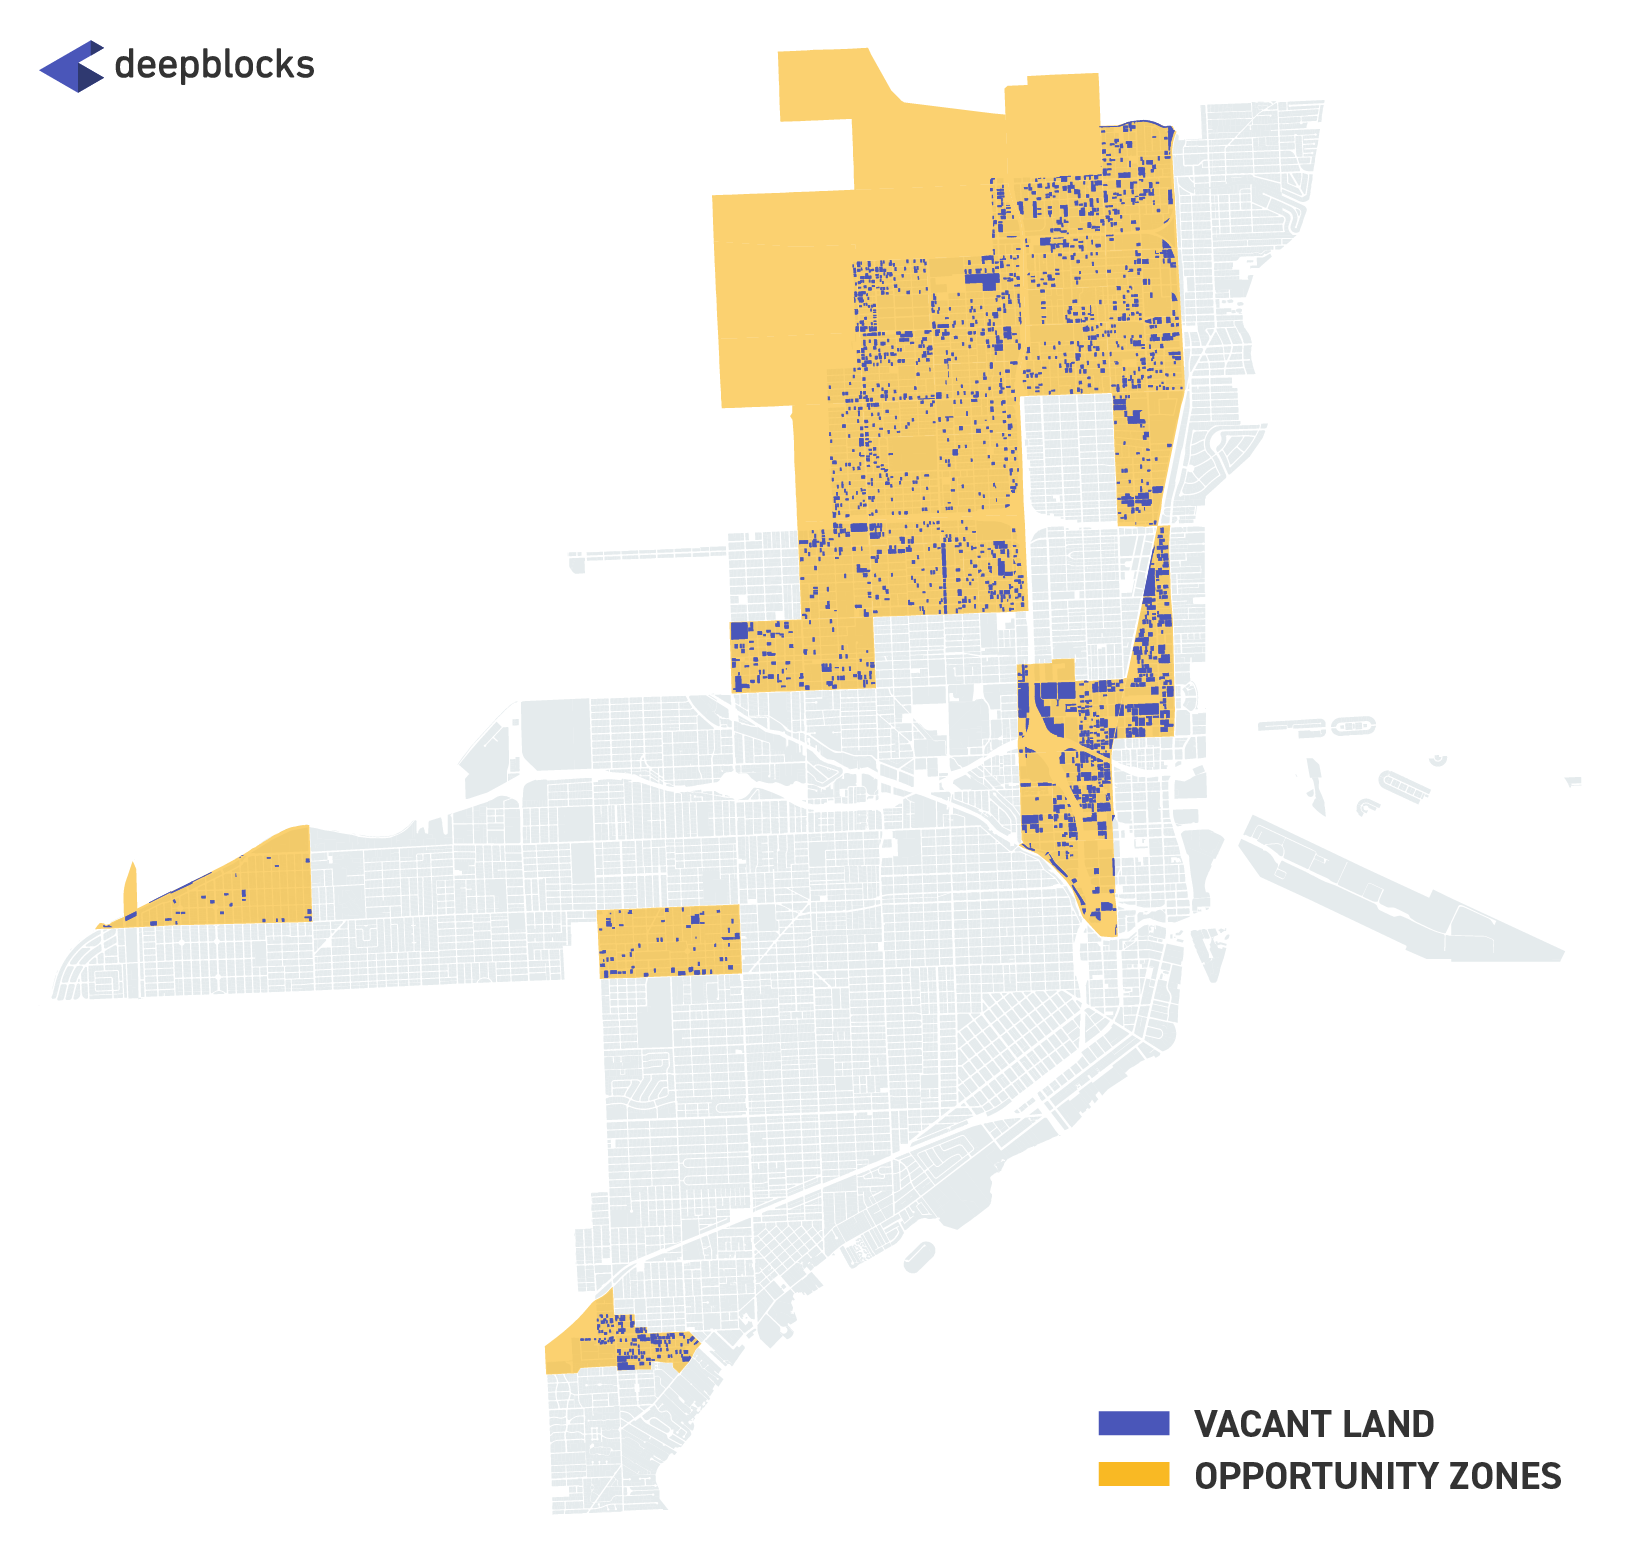 Vacant Land in the City of Miami’s Opportunity Zones